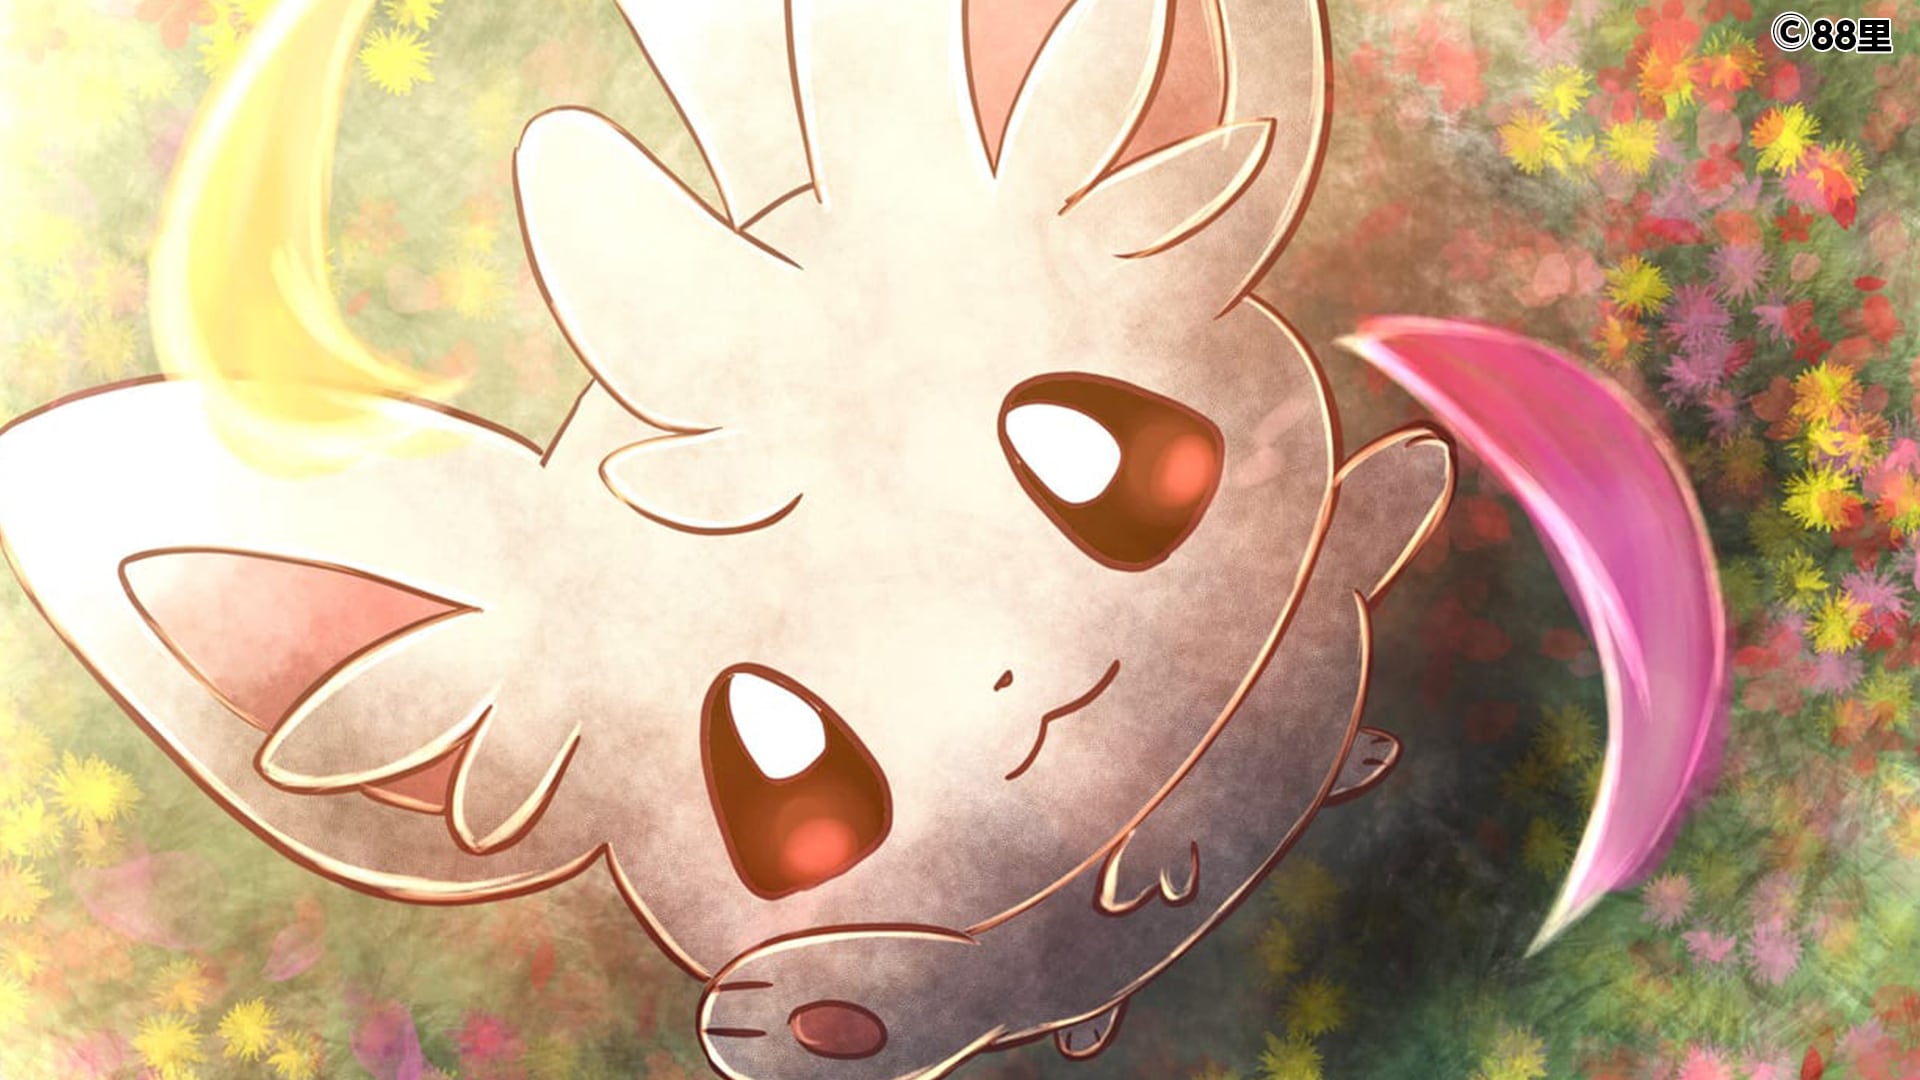 Normal Type Pokémon Fanart Collection. They Are Normal Types but unique looks. ART street- Social Networking Site for Posting Illustrations and Manga